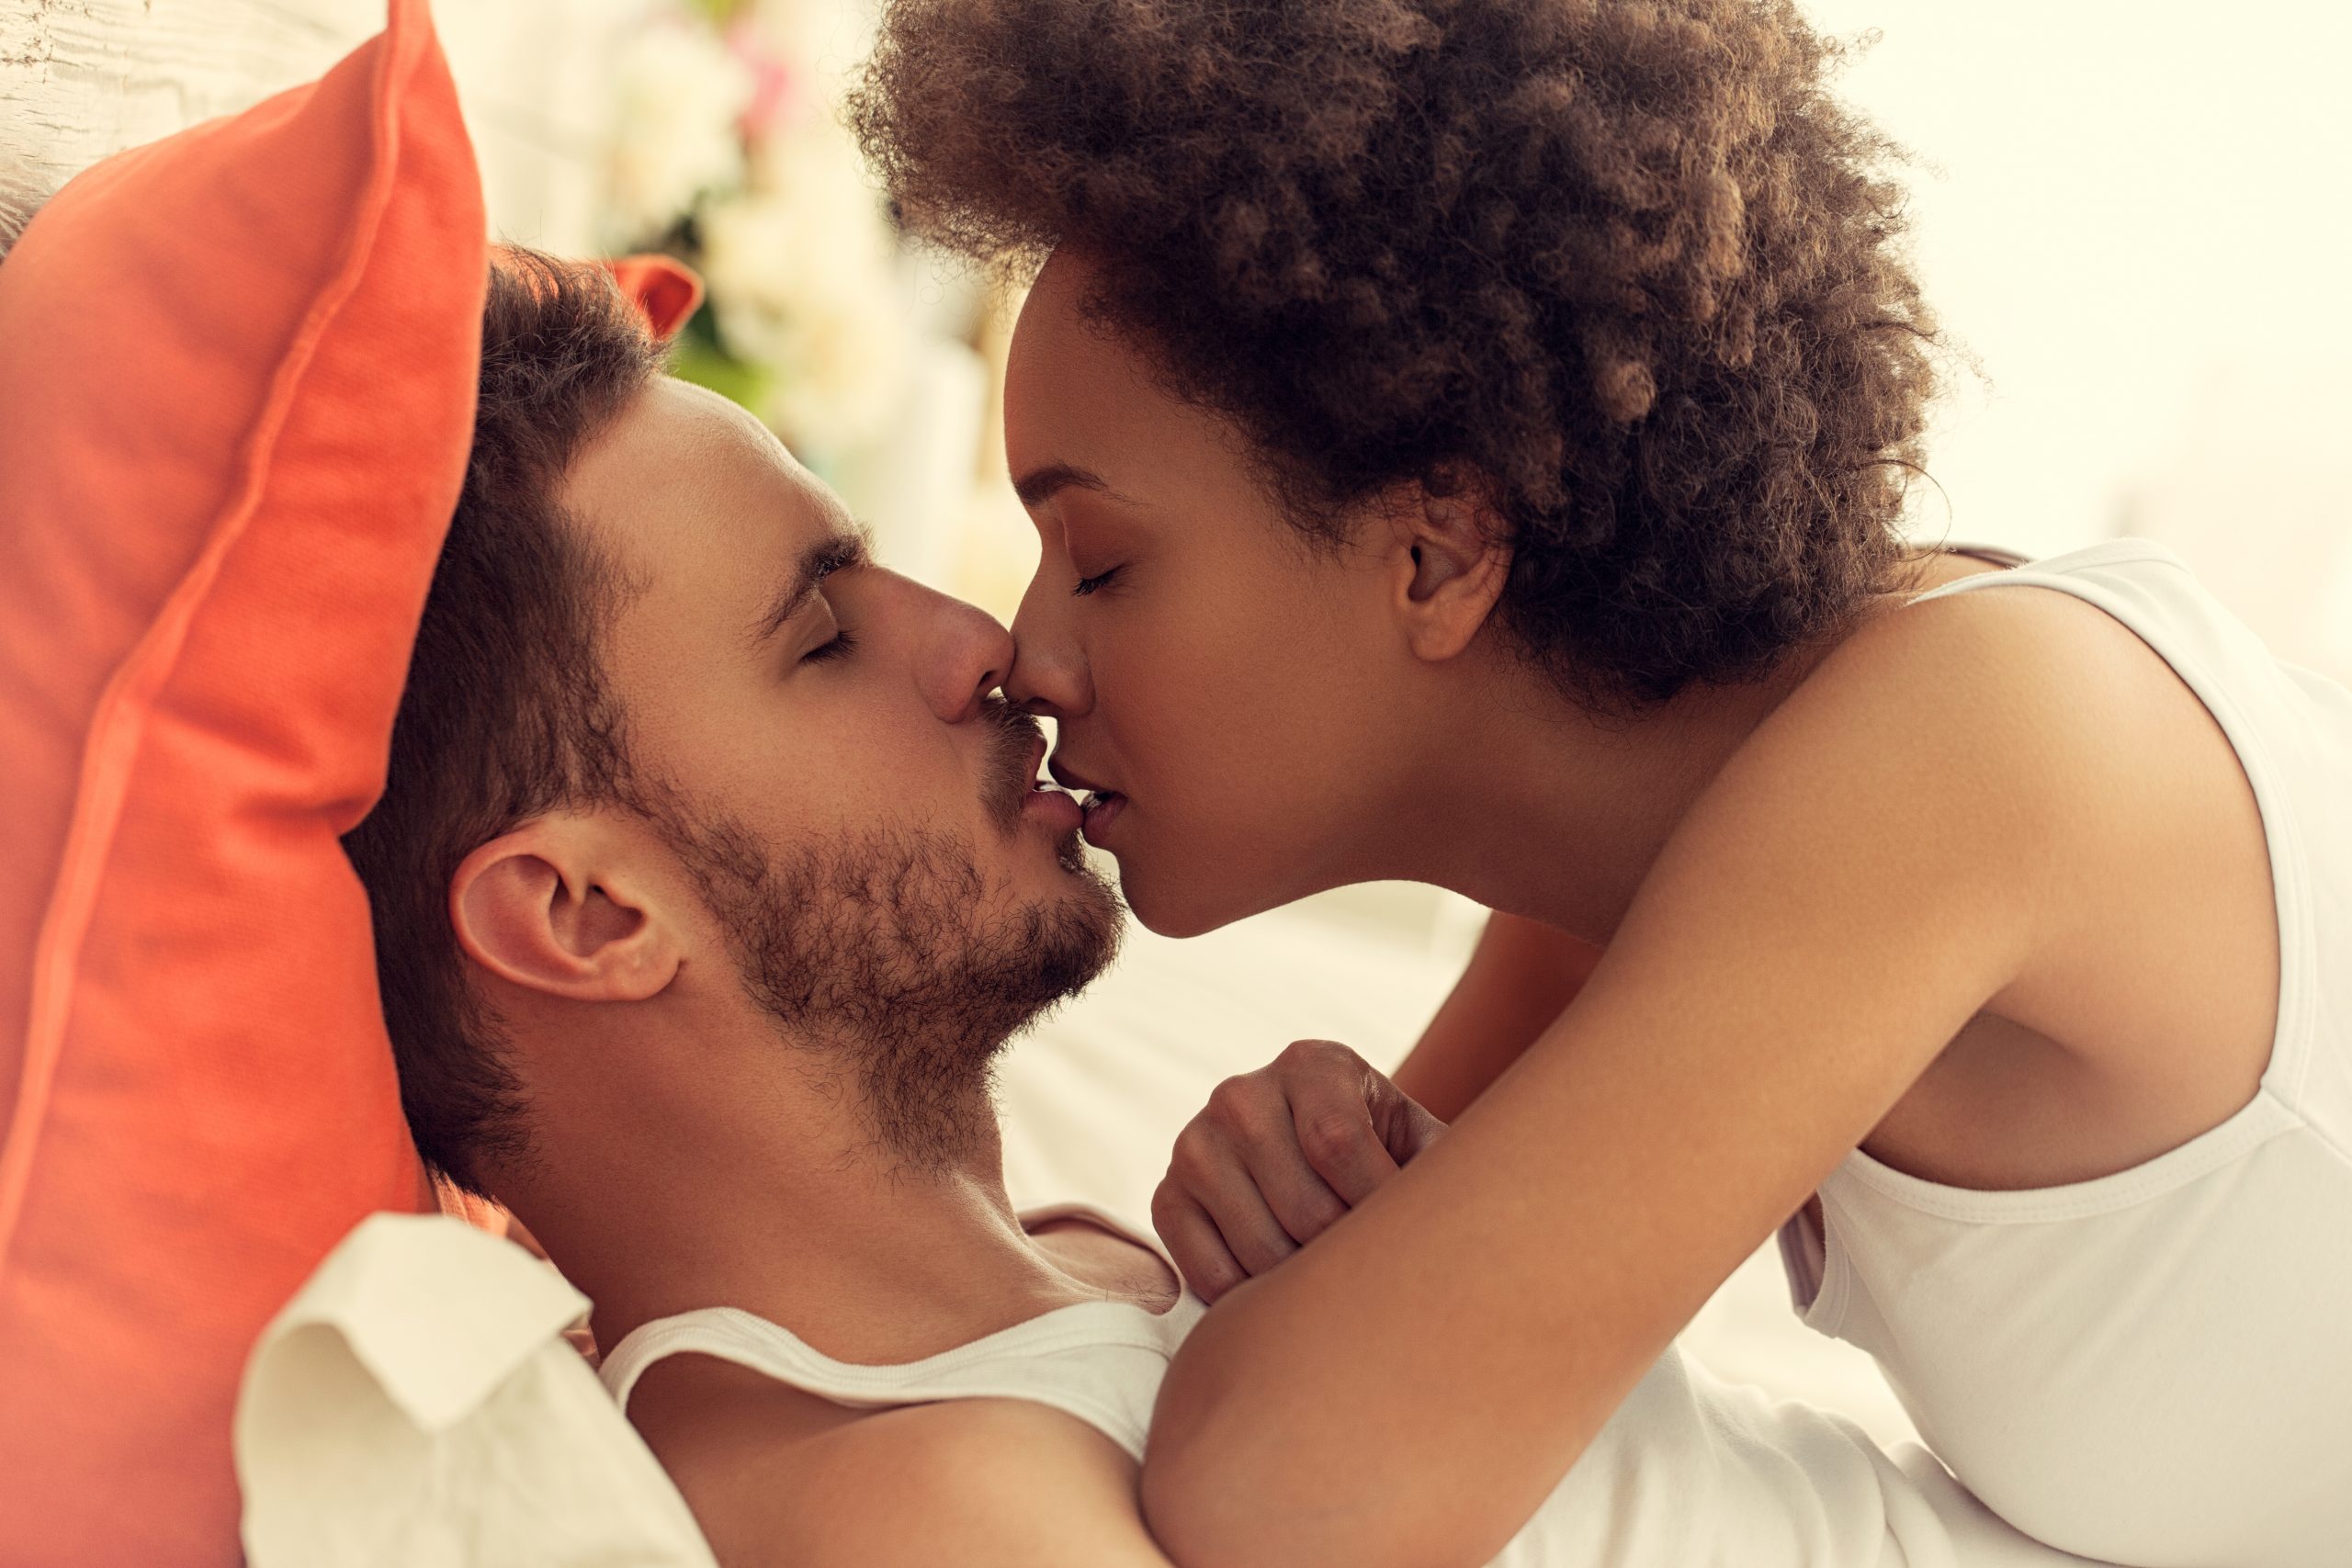 A woman and man kiss in bed. Human papillomavirus (HPV) infection is a sexually transmitted oral cancer risk factor.